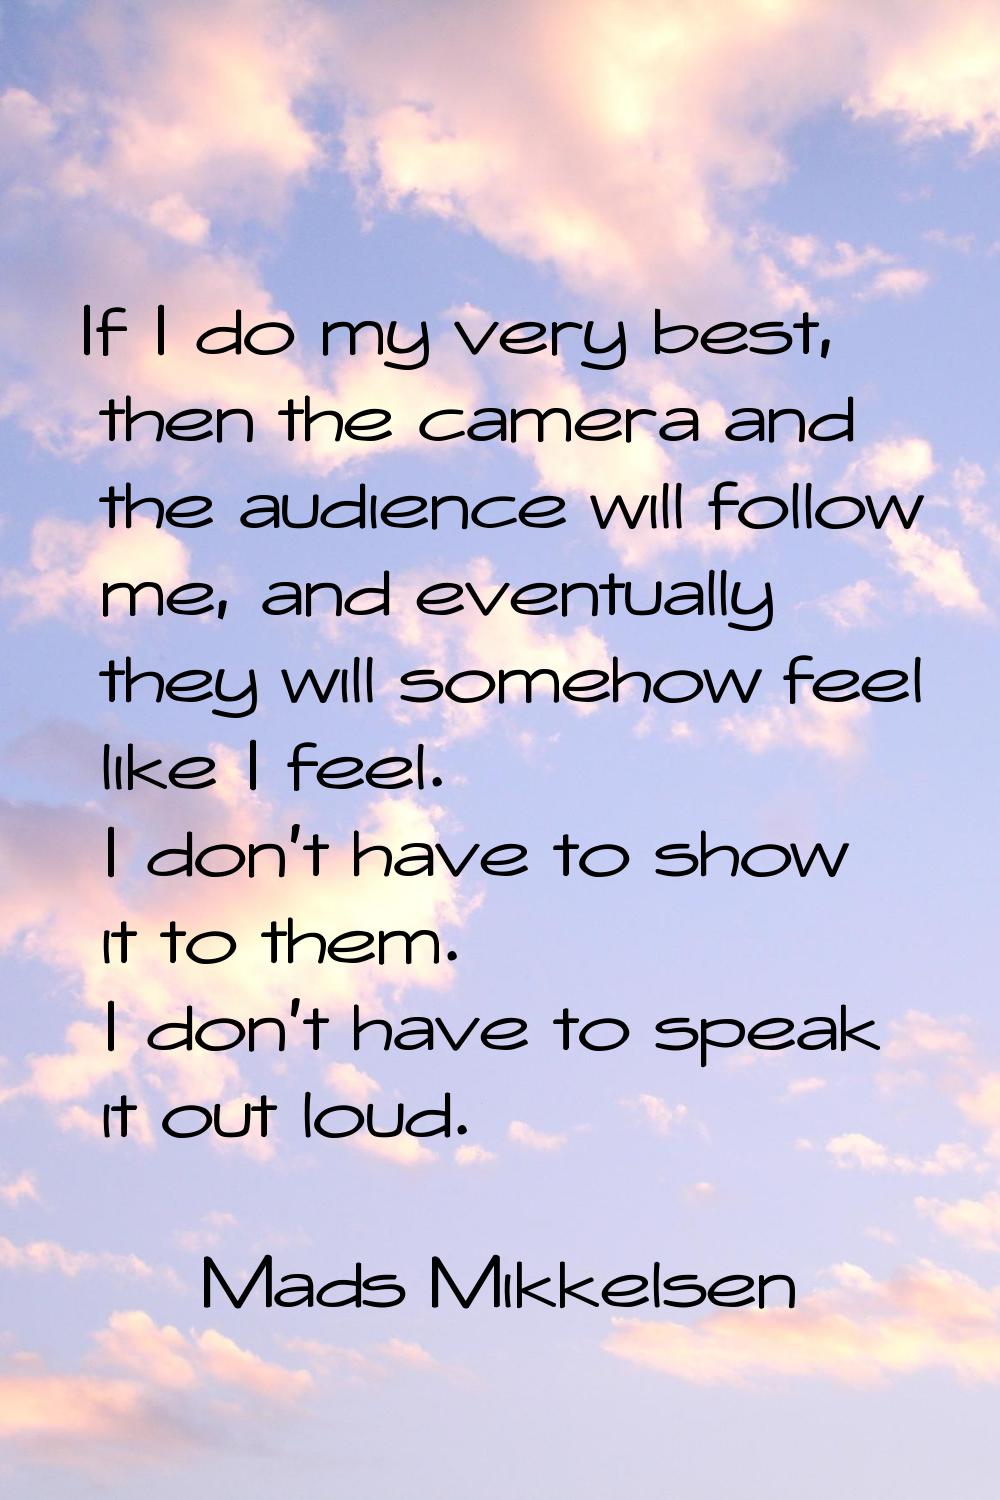 If I do my very best, then the camera and the audience will follow me, and eventually they will som